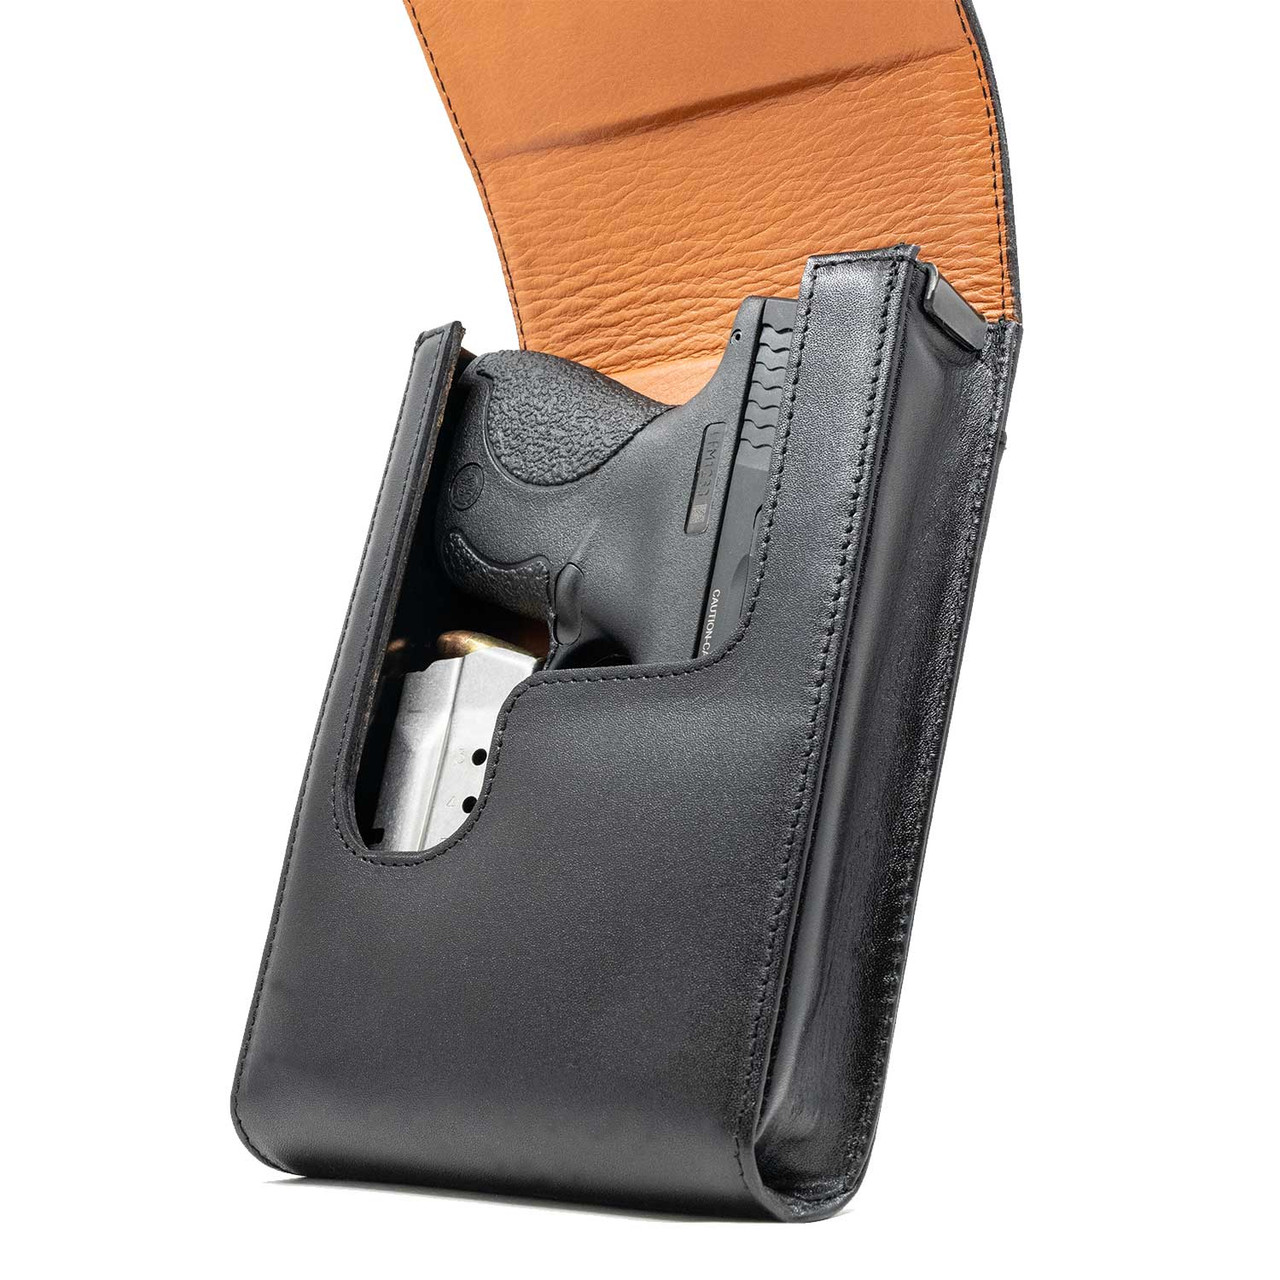 The Walther PPK Xtra Mag Black Leather Holster